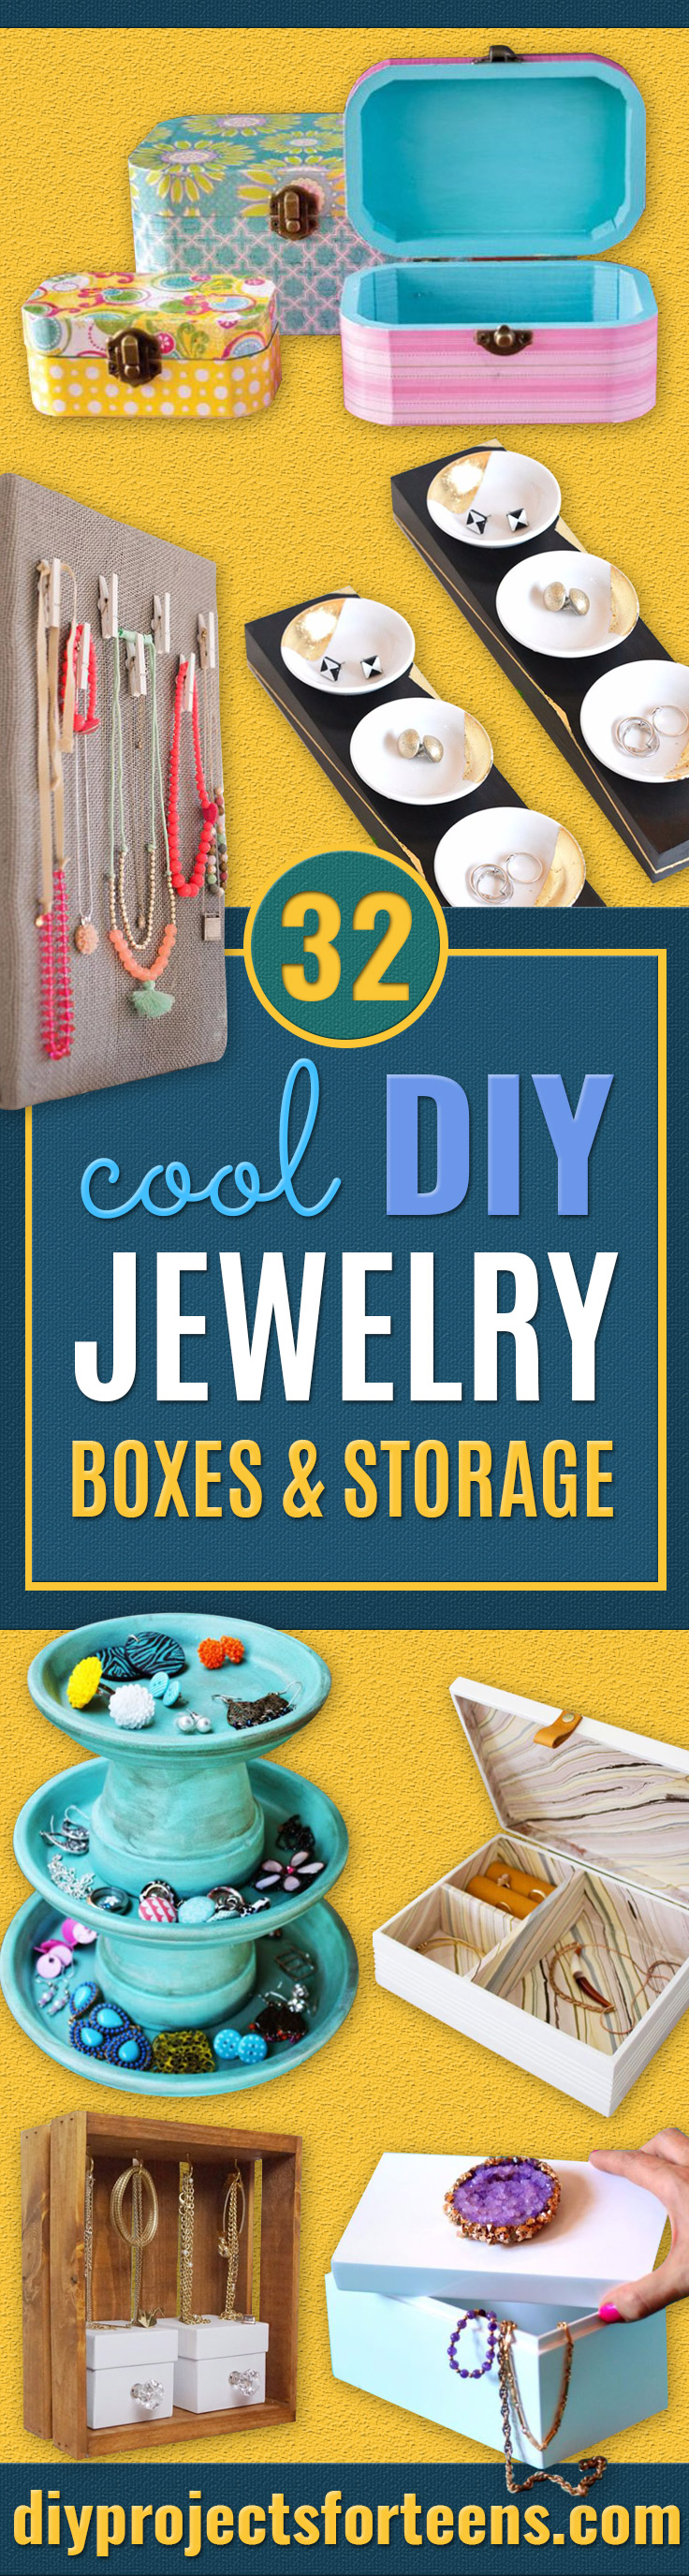 DIY Jewelry Storage - Do It Yourself Crafts and Projects for Organizing, Storing and Displaying Jewelry - Earrings, Rings, Necklaces - Jewelry Tree, Boxes, Hangers - Cheap and Easy Ways To Organize Jewelry in Bedroom and Bathroom - Dollar Store Crafts and Cheap Ideas for Decorating http://stage.diyprojectsforteens.com/diy-jewelry-storage